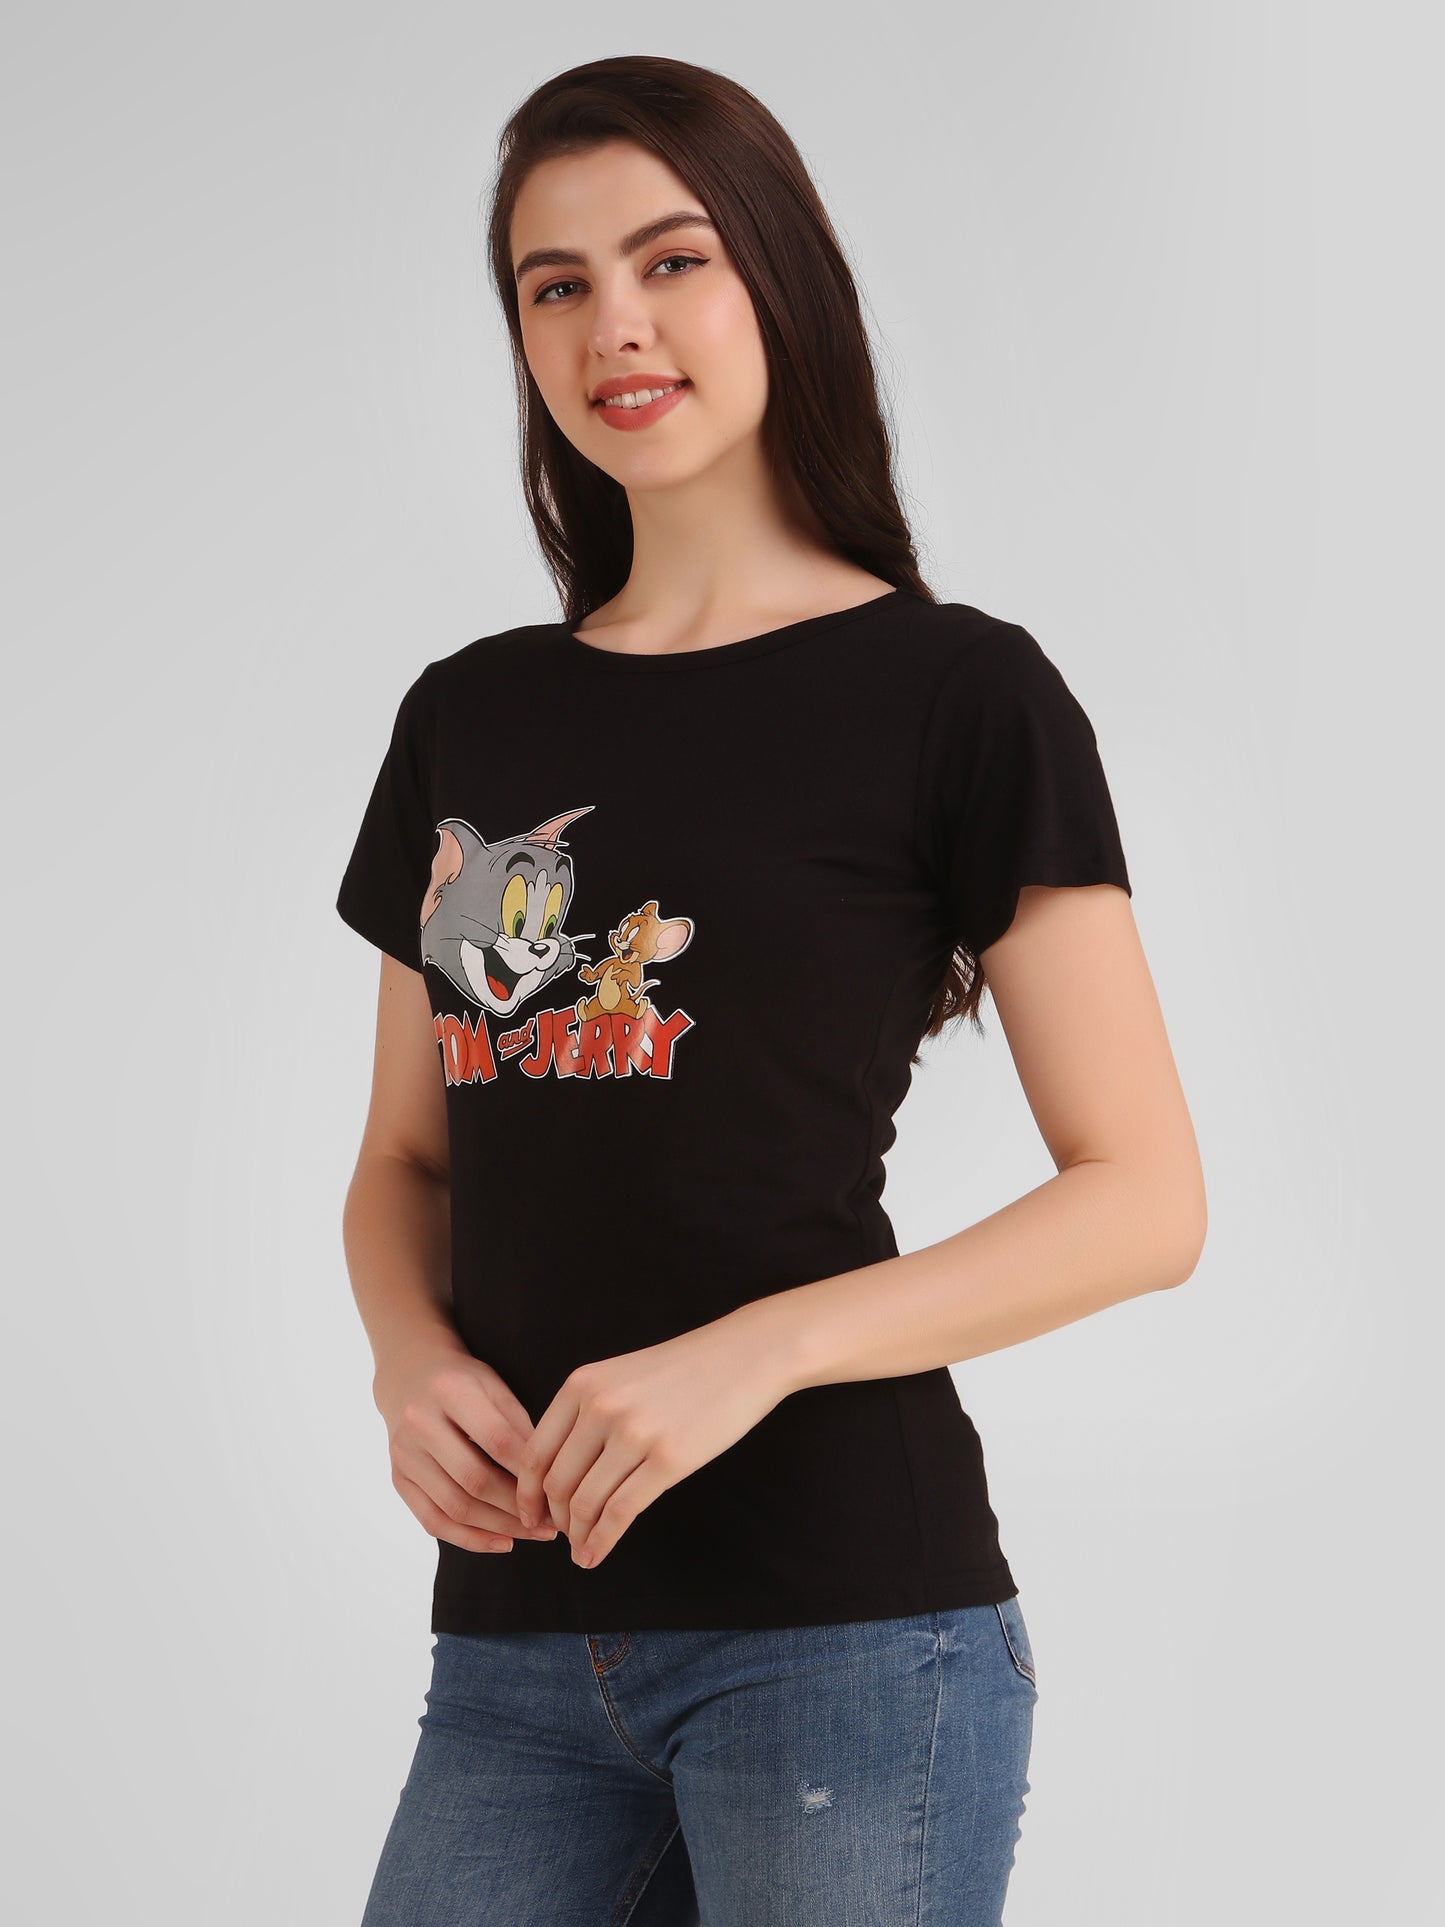 Yellow Tree and  Black Tom & Jerry Print Combo ( 2 Tops) Trendy T Shirt!!